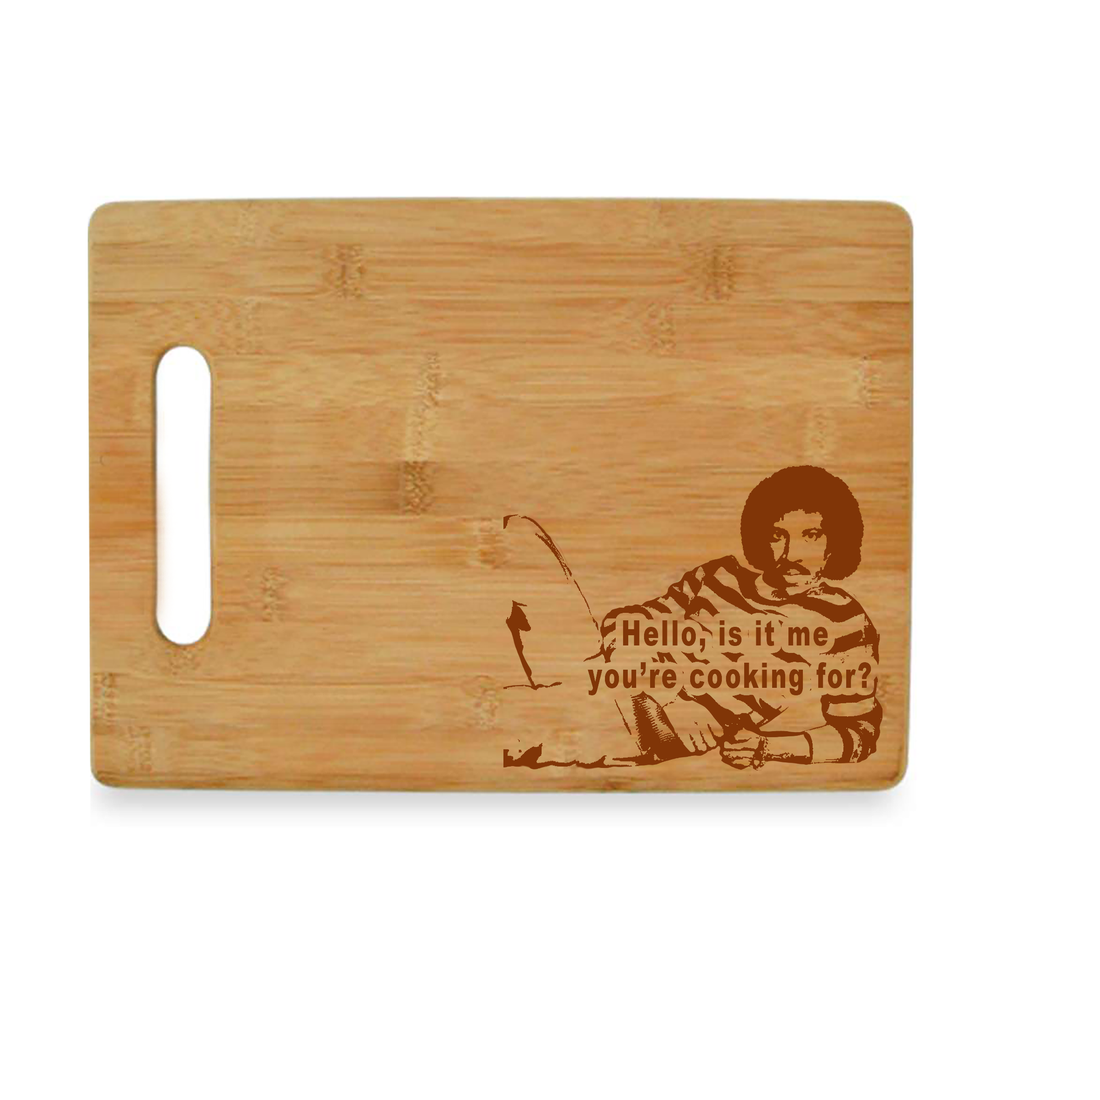 Gift for funny friends. Lionel Ritchie bamboo cutting board.